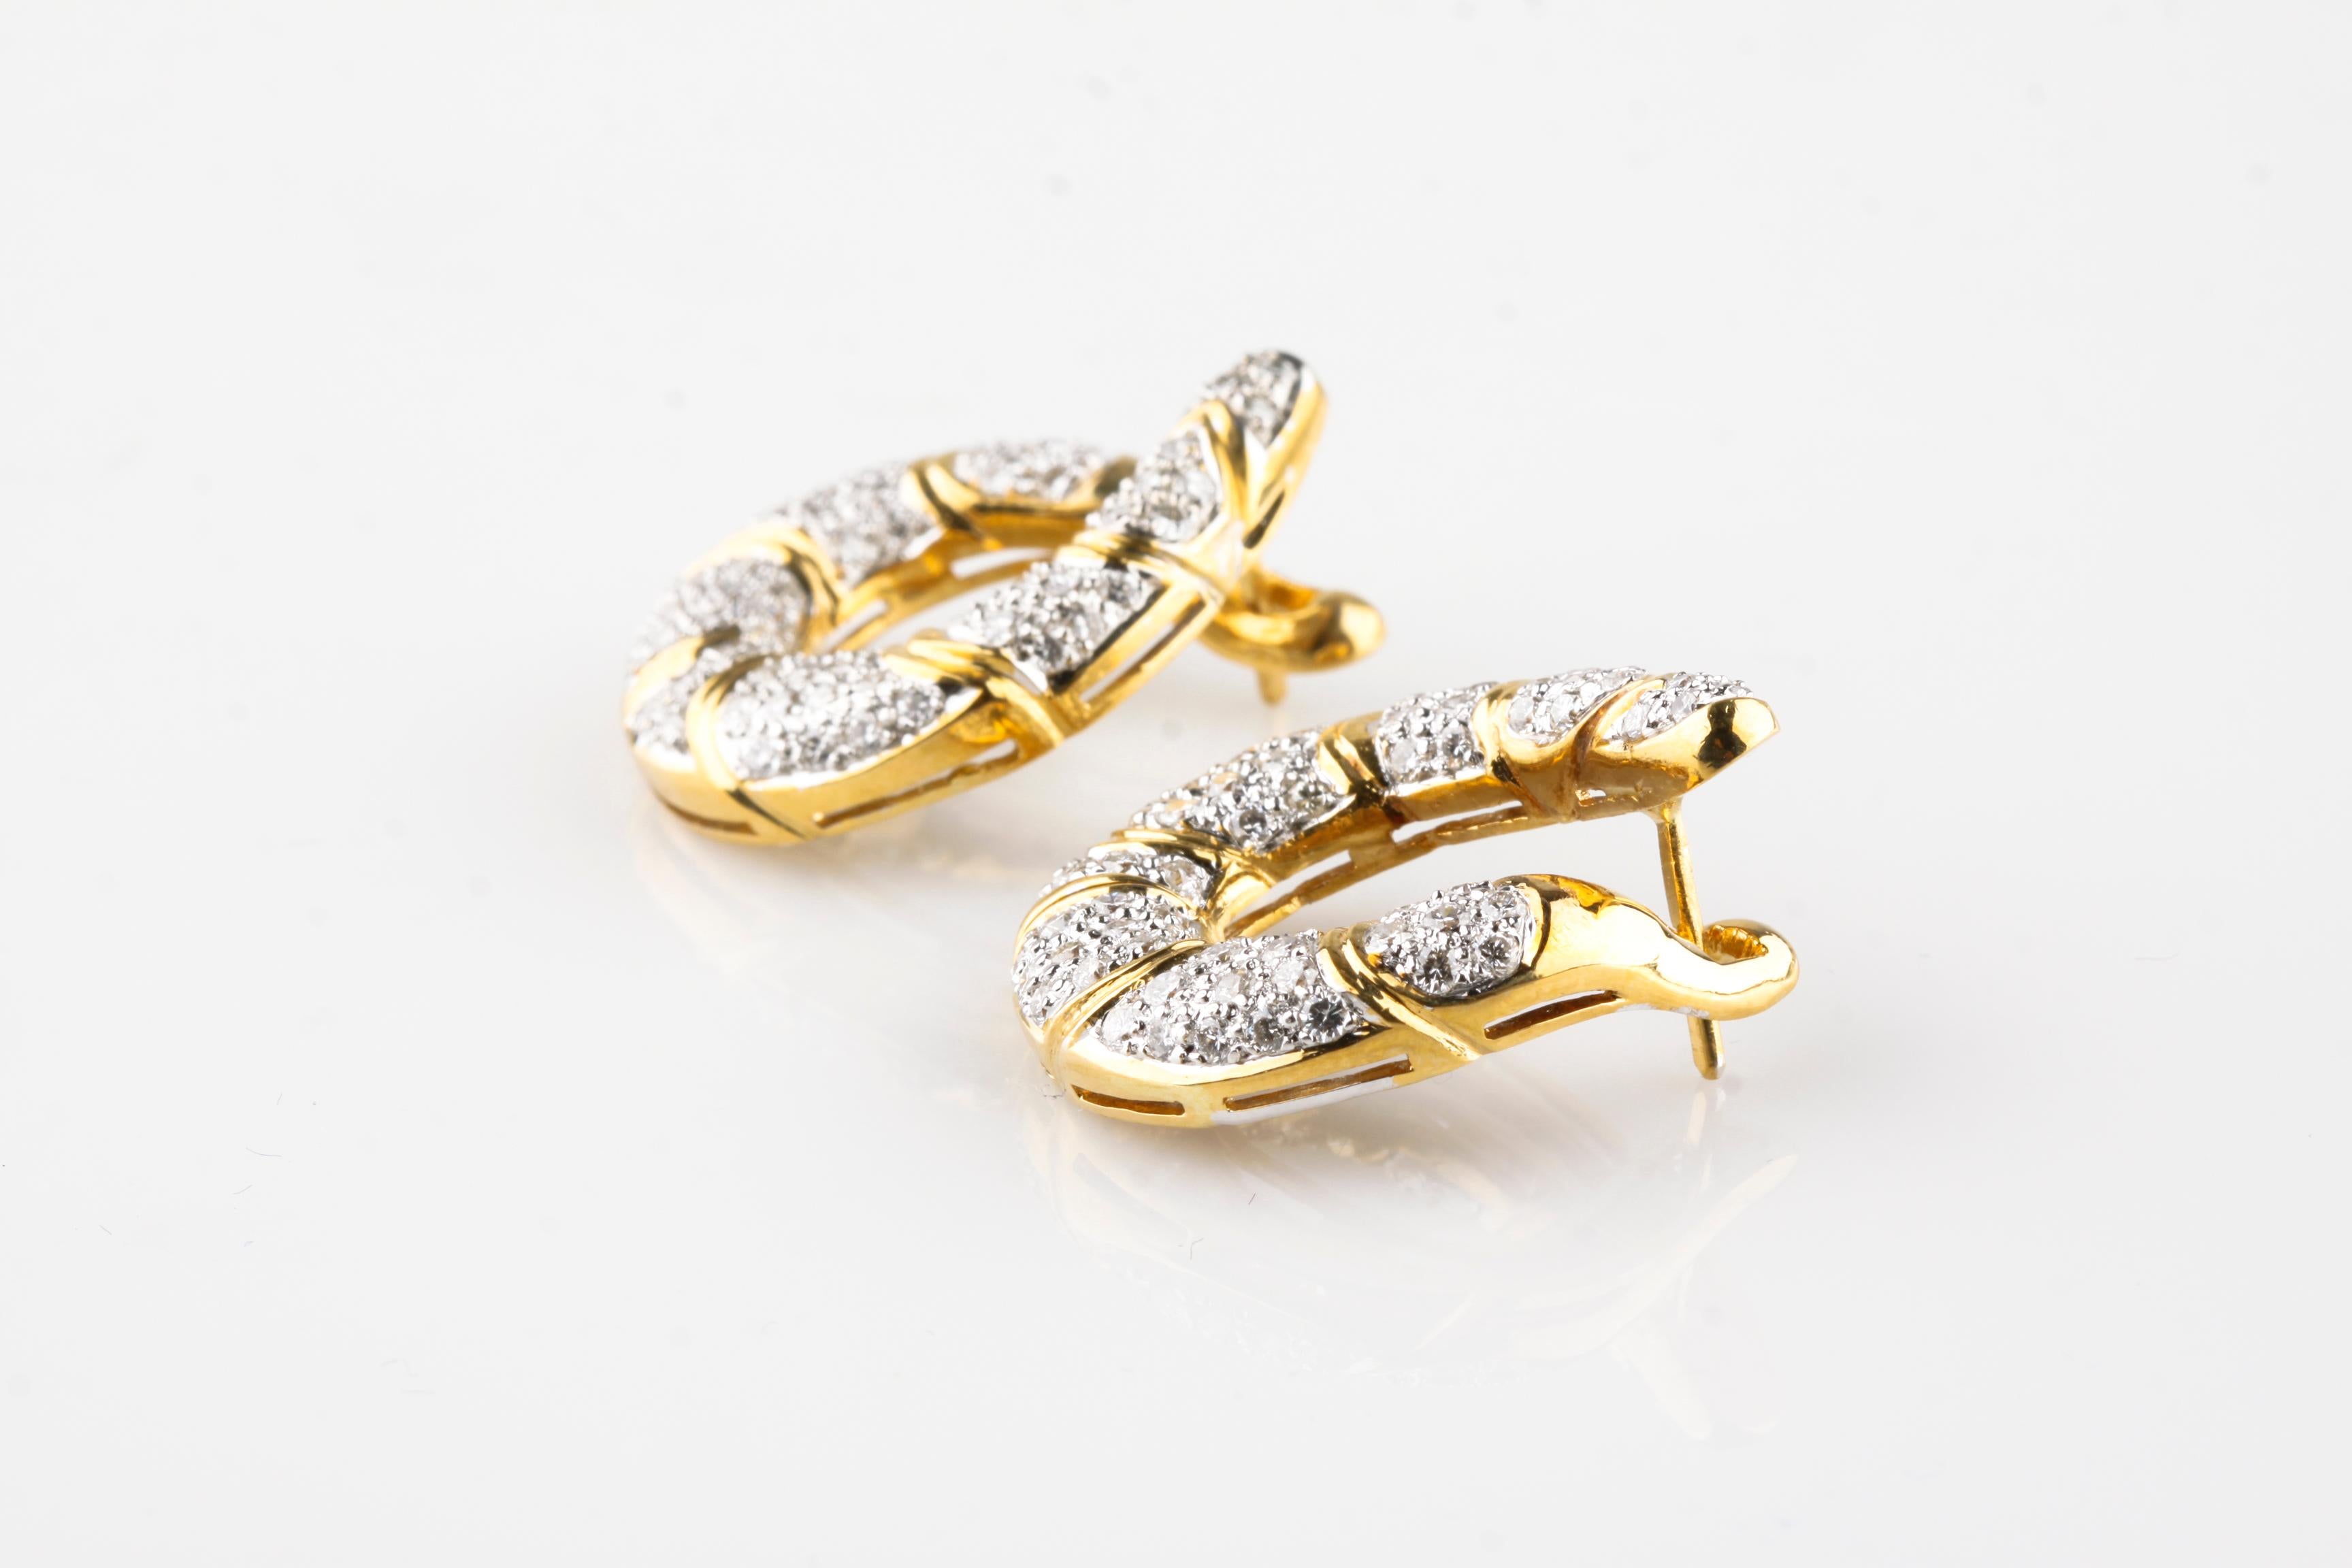 Gorgeous 14k White and Yellow Gold Swoop Post Earrings
Feature Hinged Design Allowing Front to Snap into Back
Total Diamond Weight = 2.0 Cts
Average Color = F - G
Average Clarity = VS
Length of Drop = 27 mm
Width of Swoop = 23 mm
Total Mass = 16